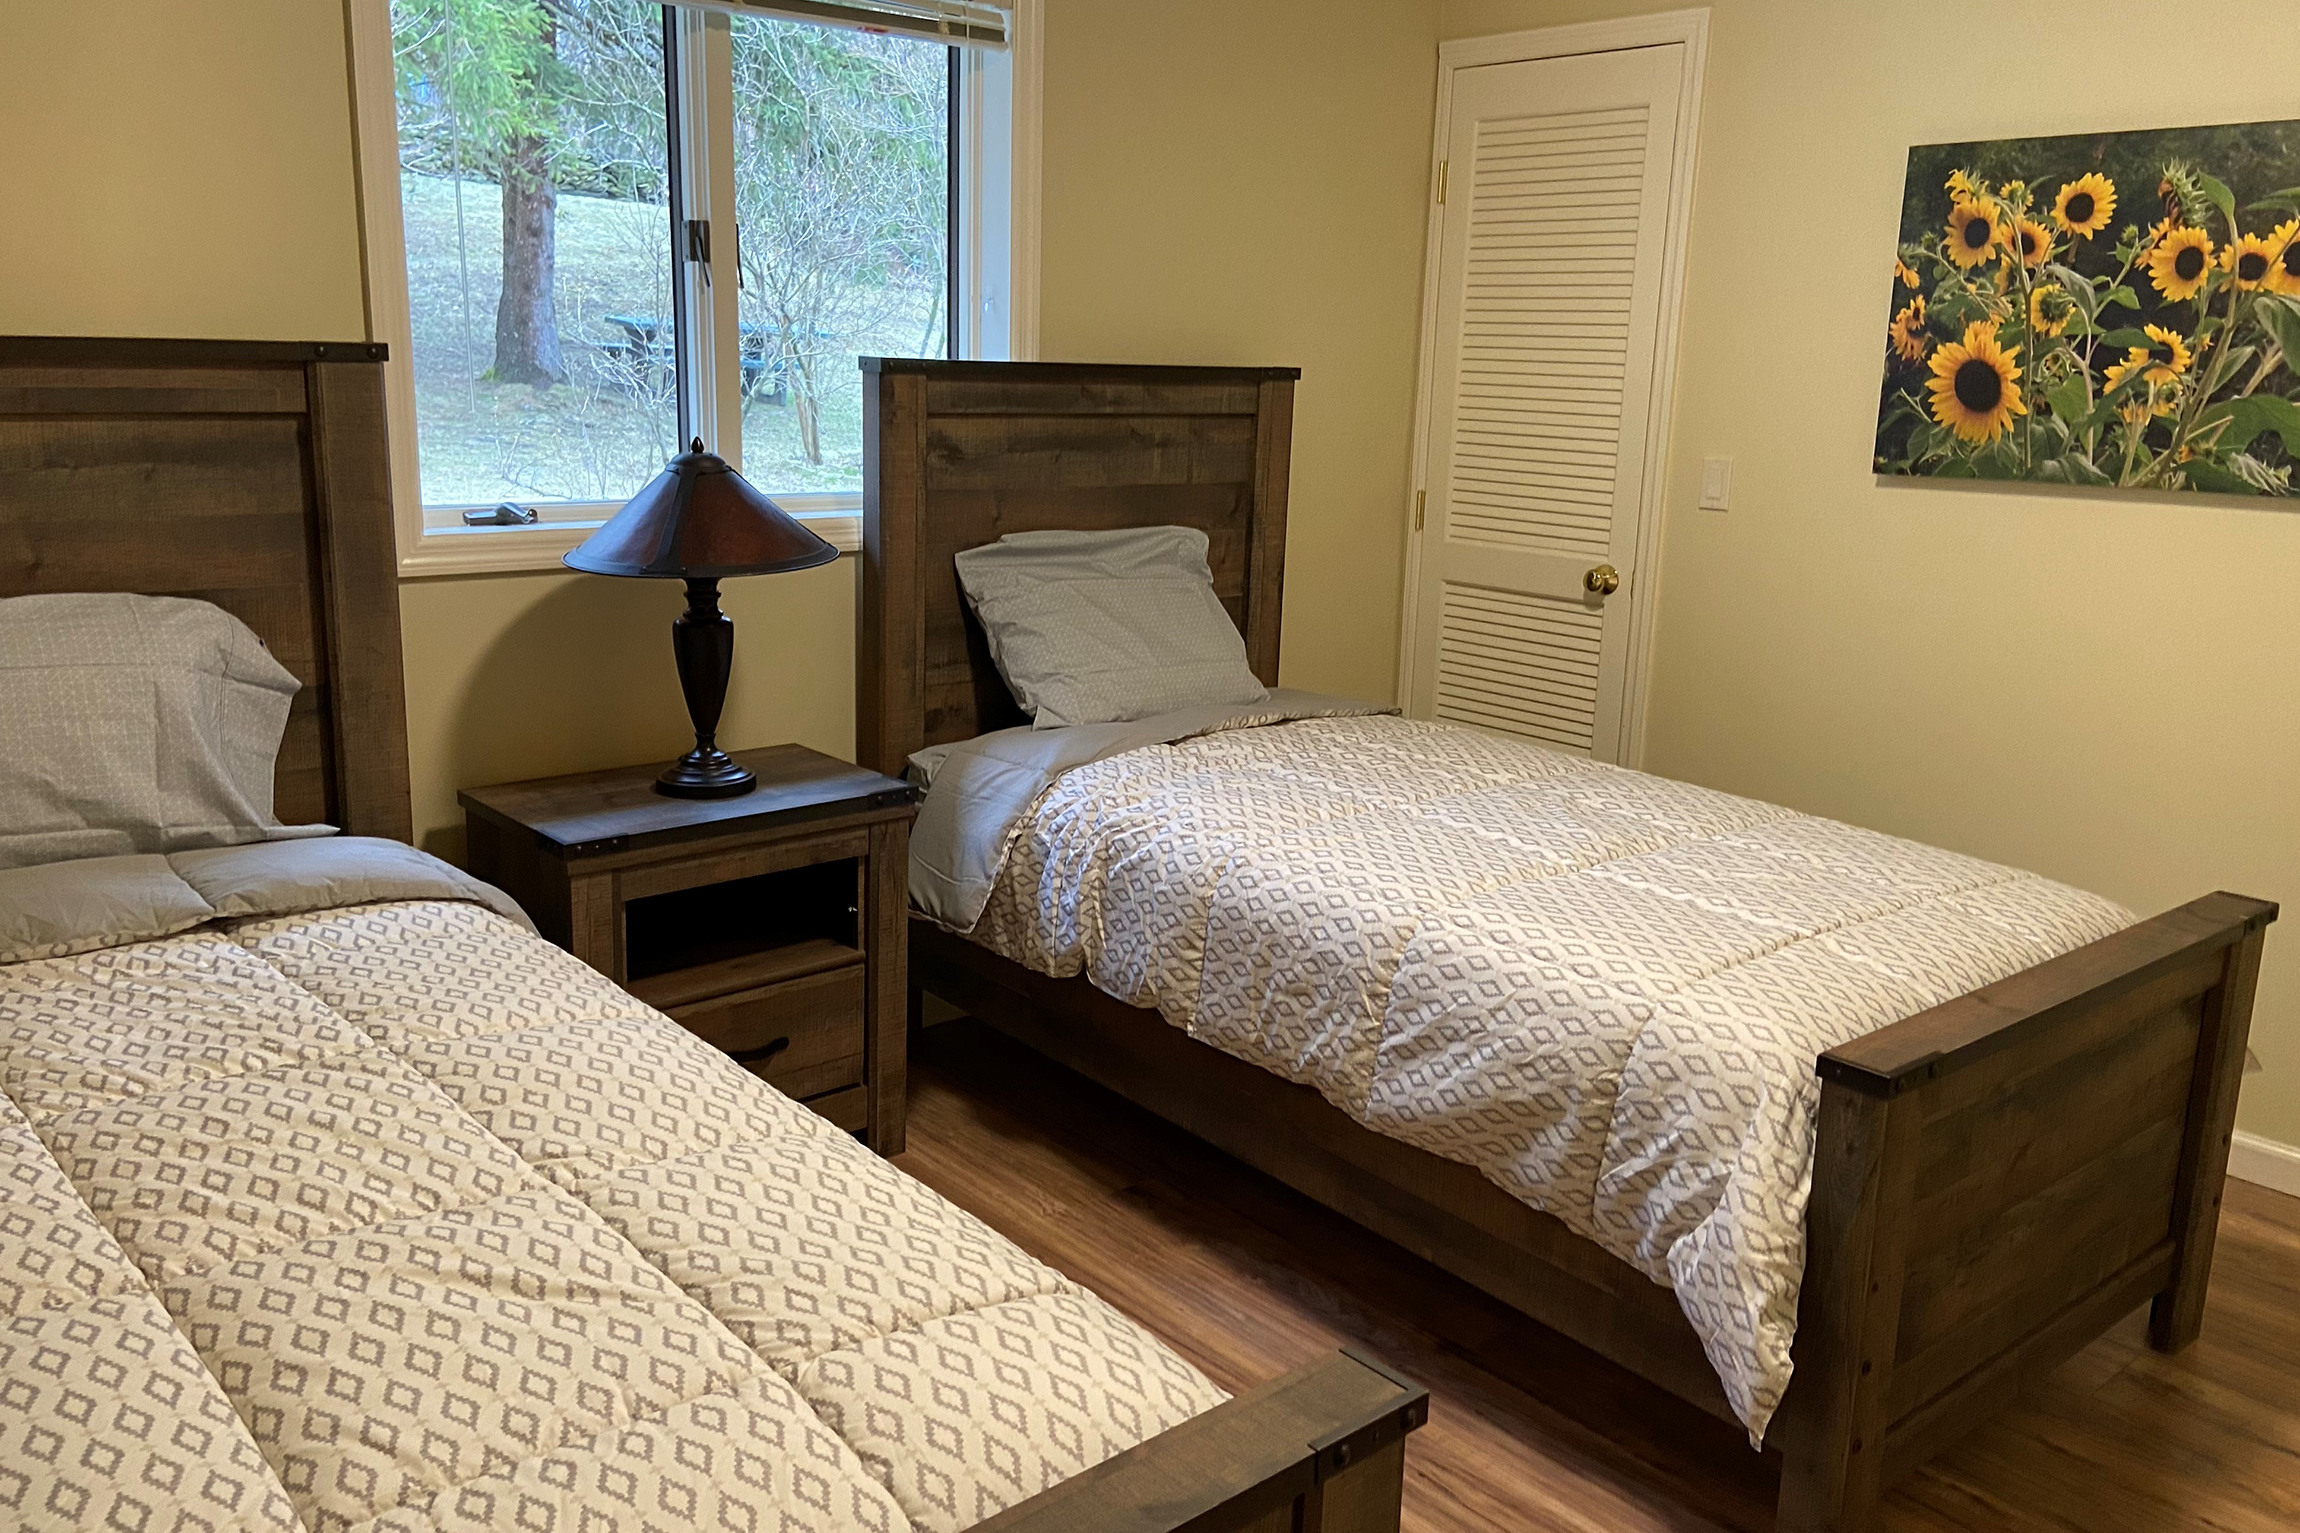 The Cultivating Dreams Life Skills Center has fully furnished bedrooms.bedroom